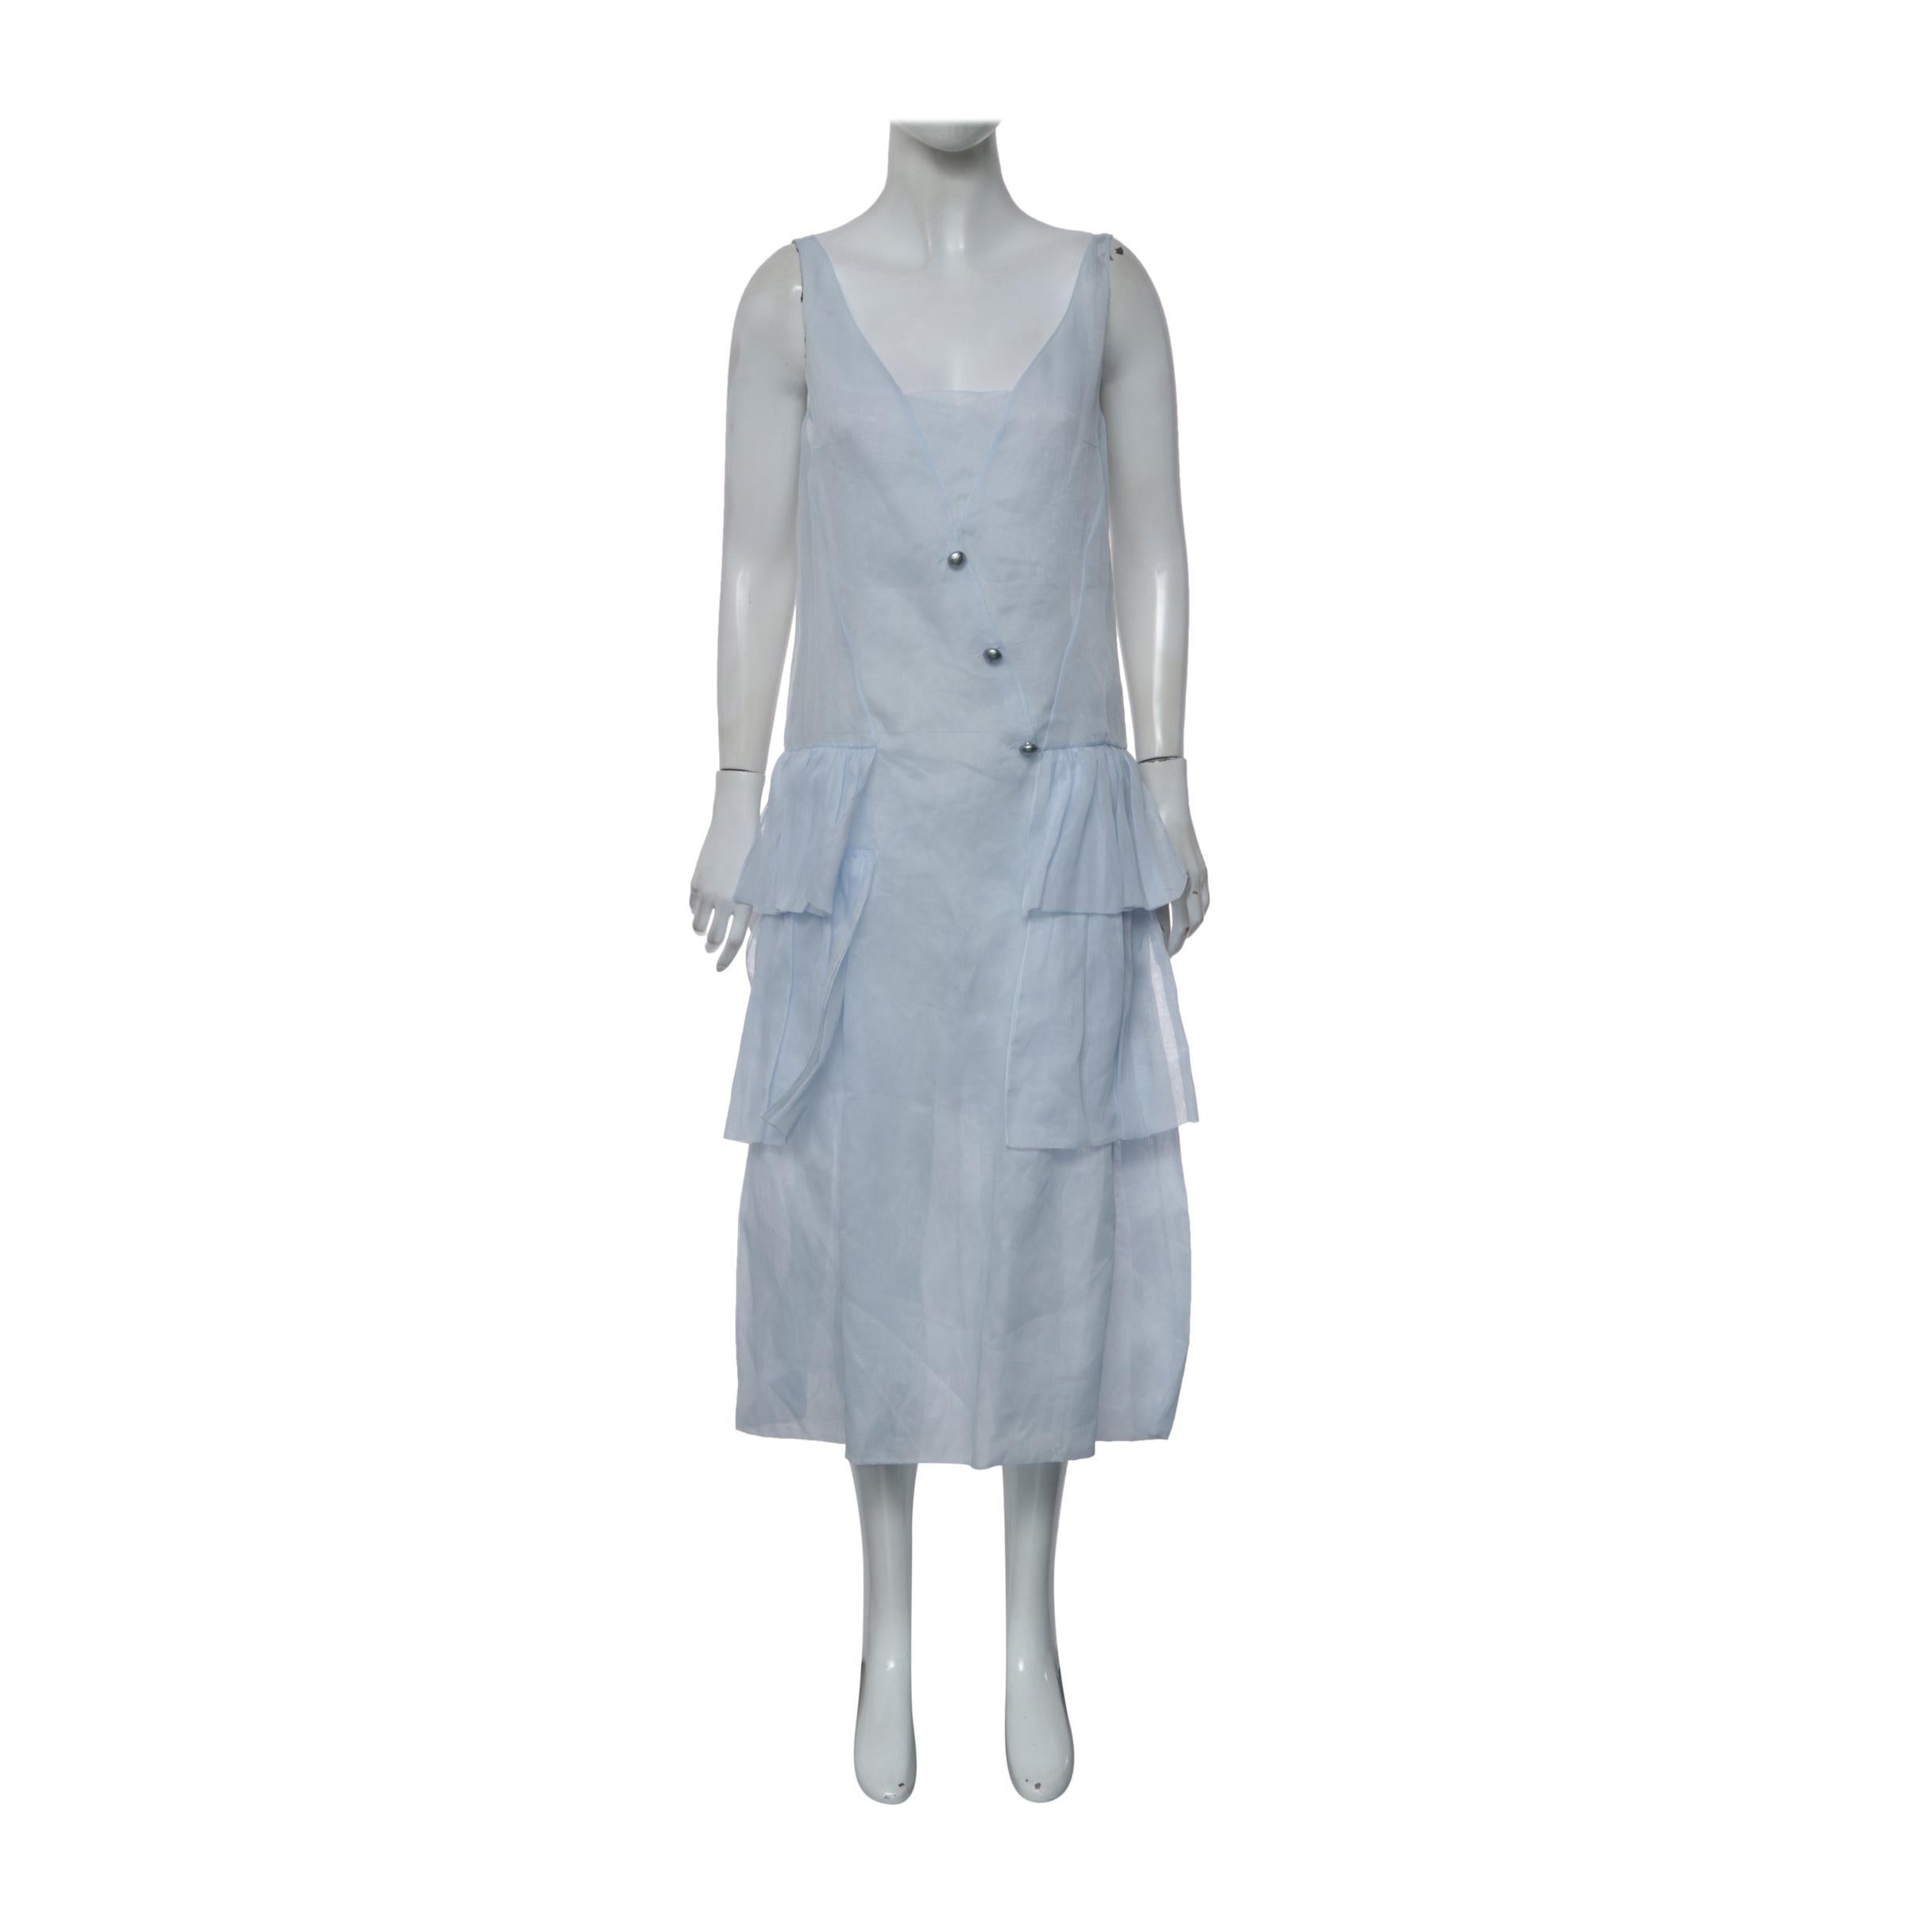 Chanel organza-like dress from 2021 collection. In brand new and unworn condition with the tag attached. Comes with extra button. Simple yet elegant design. Retails for est. $7000. 100% Cotton.